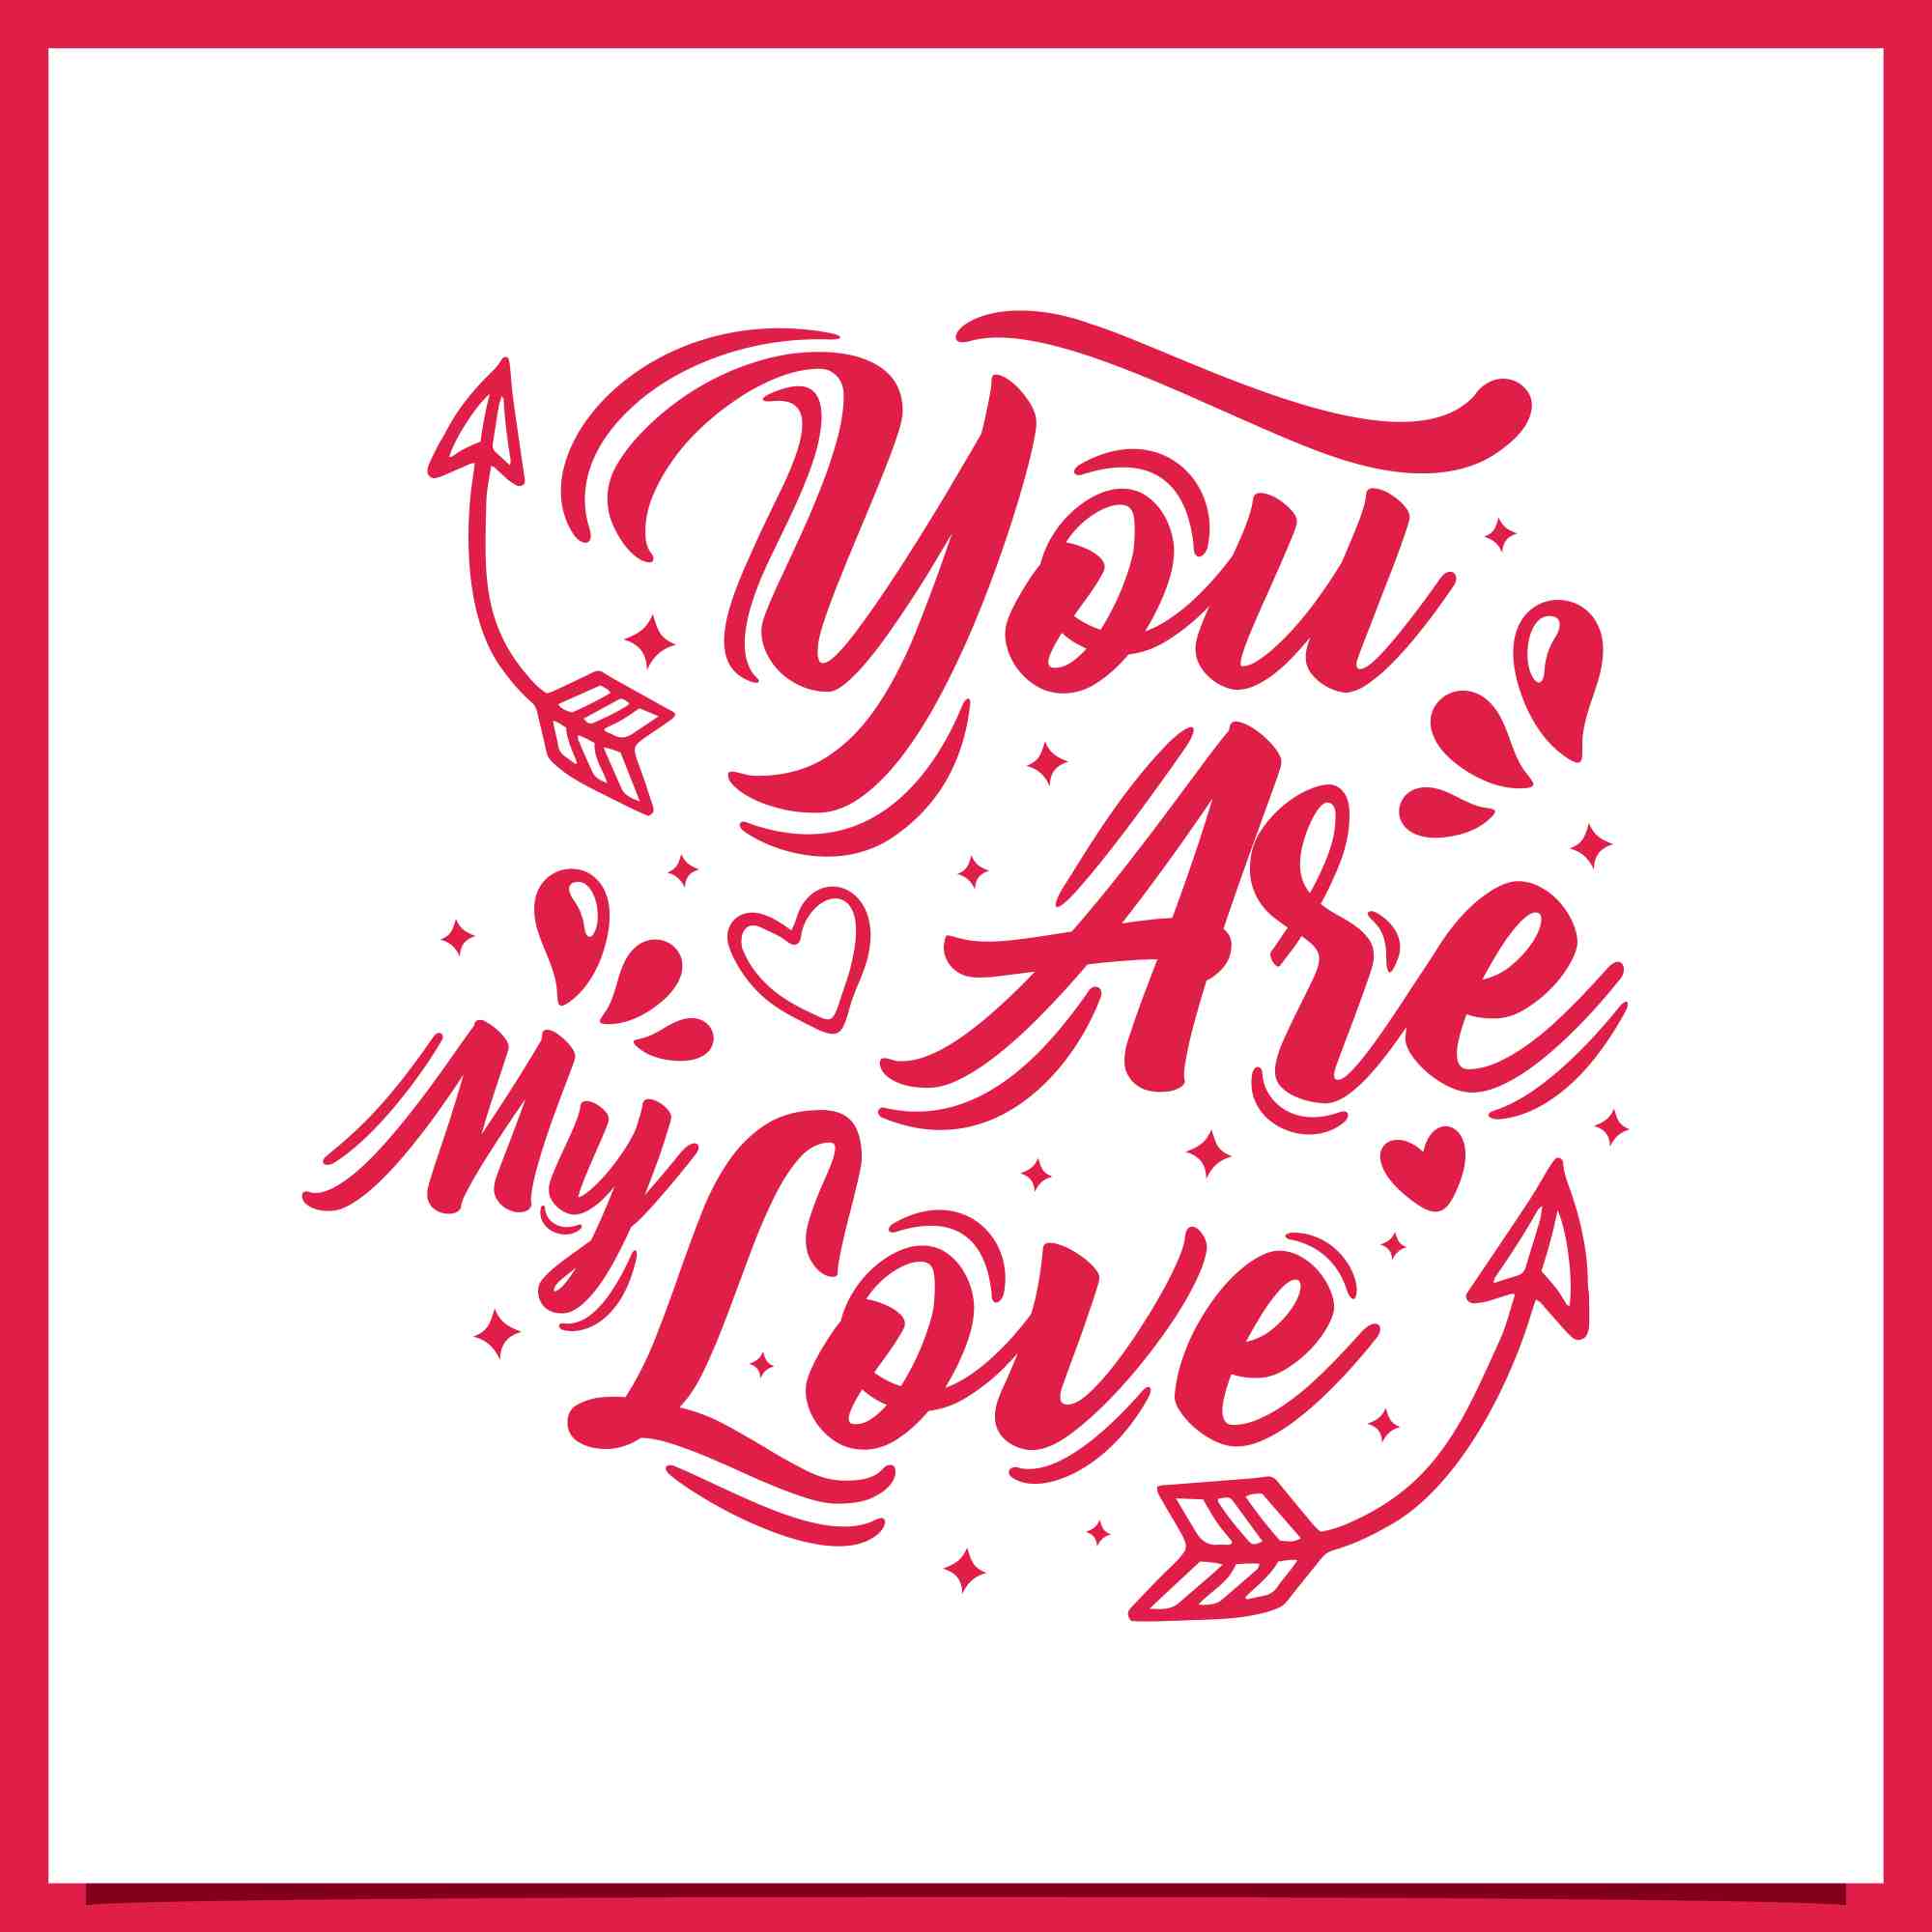 Set Happy valentine day letteing design collection - $4 preview image.